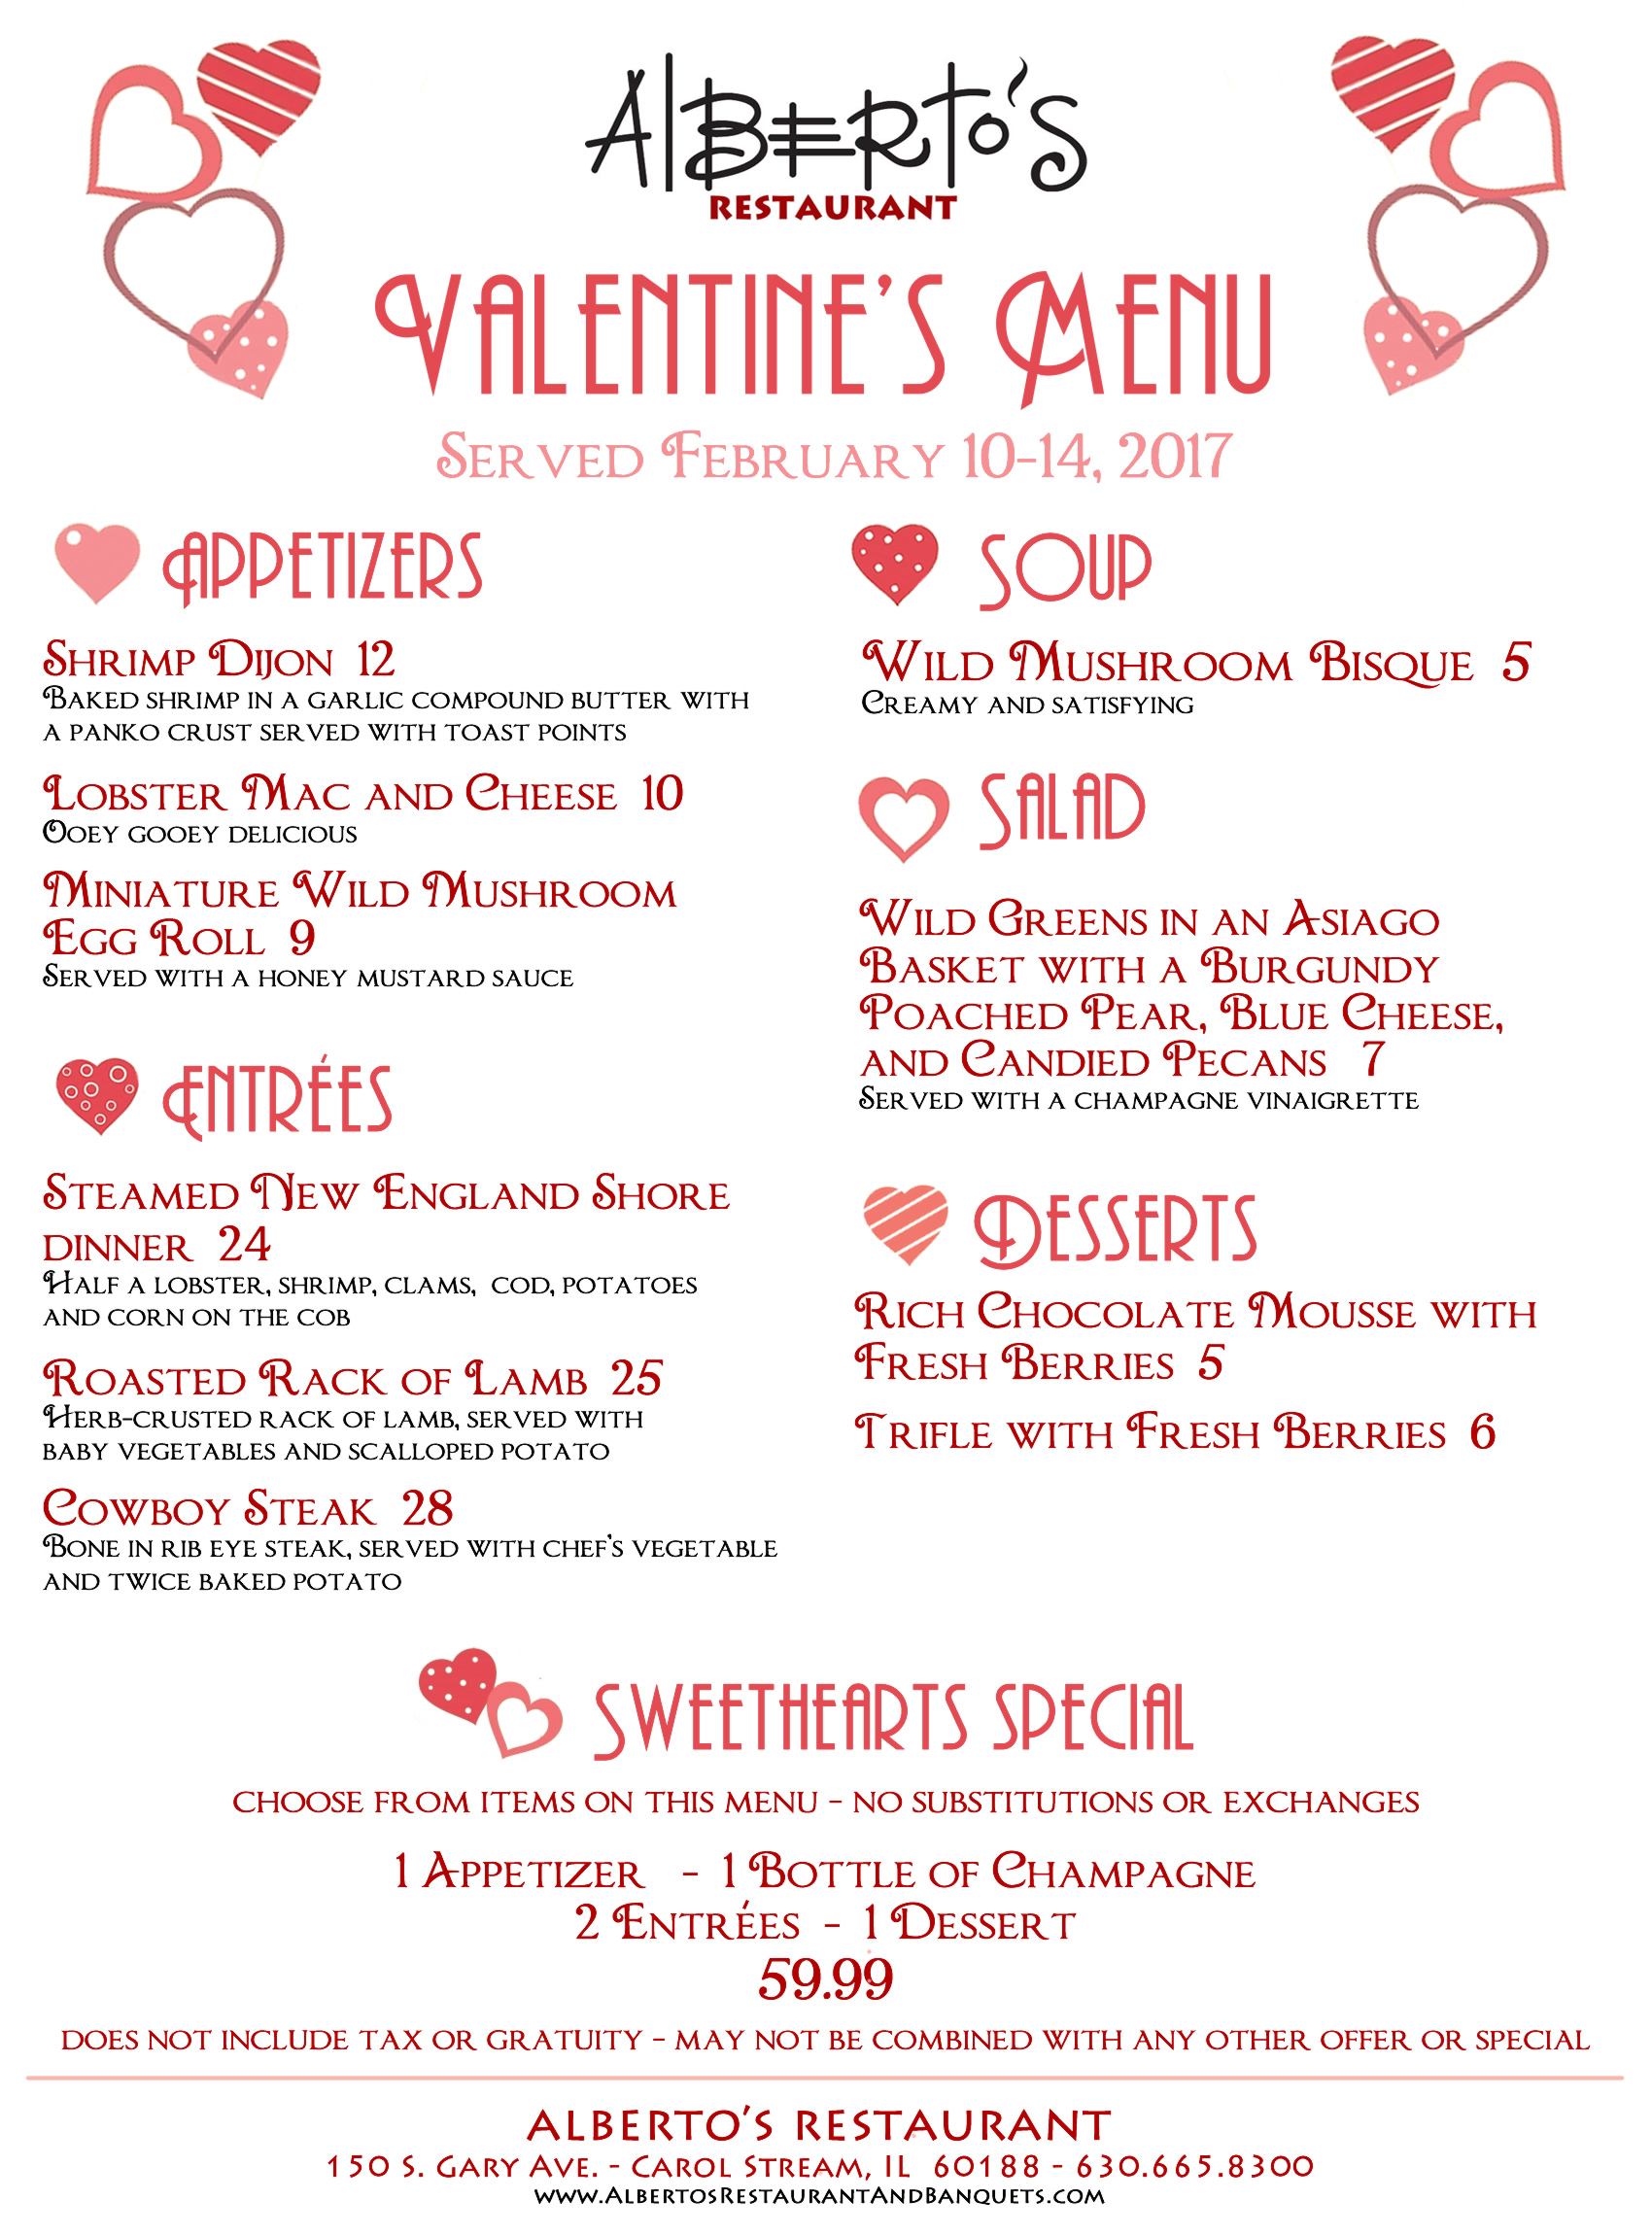 celebrate-valentine-s-day-with-a-romantic-dinner-for-2-at-alberto-s